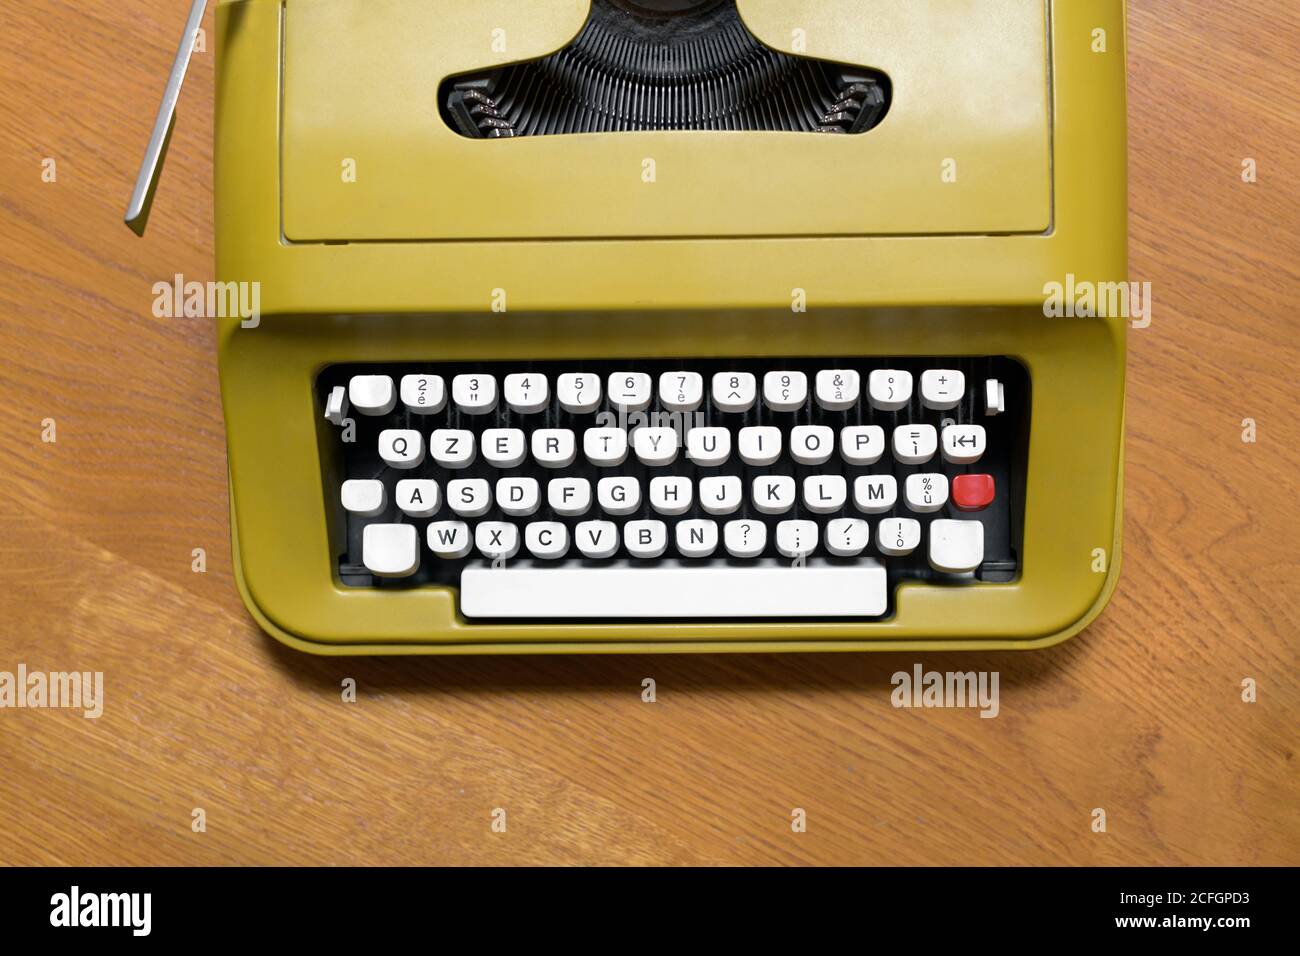 Top down view on the alphanumeric keyboard of an old retro typewriter on a wooden desk in a communication or business concept Stock Photo